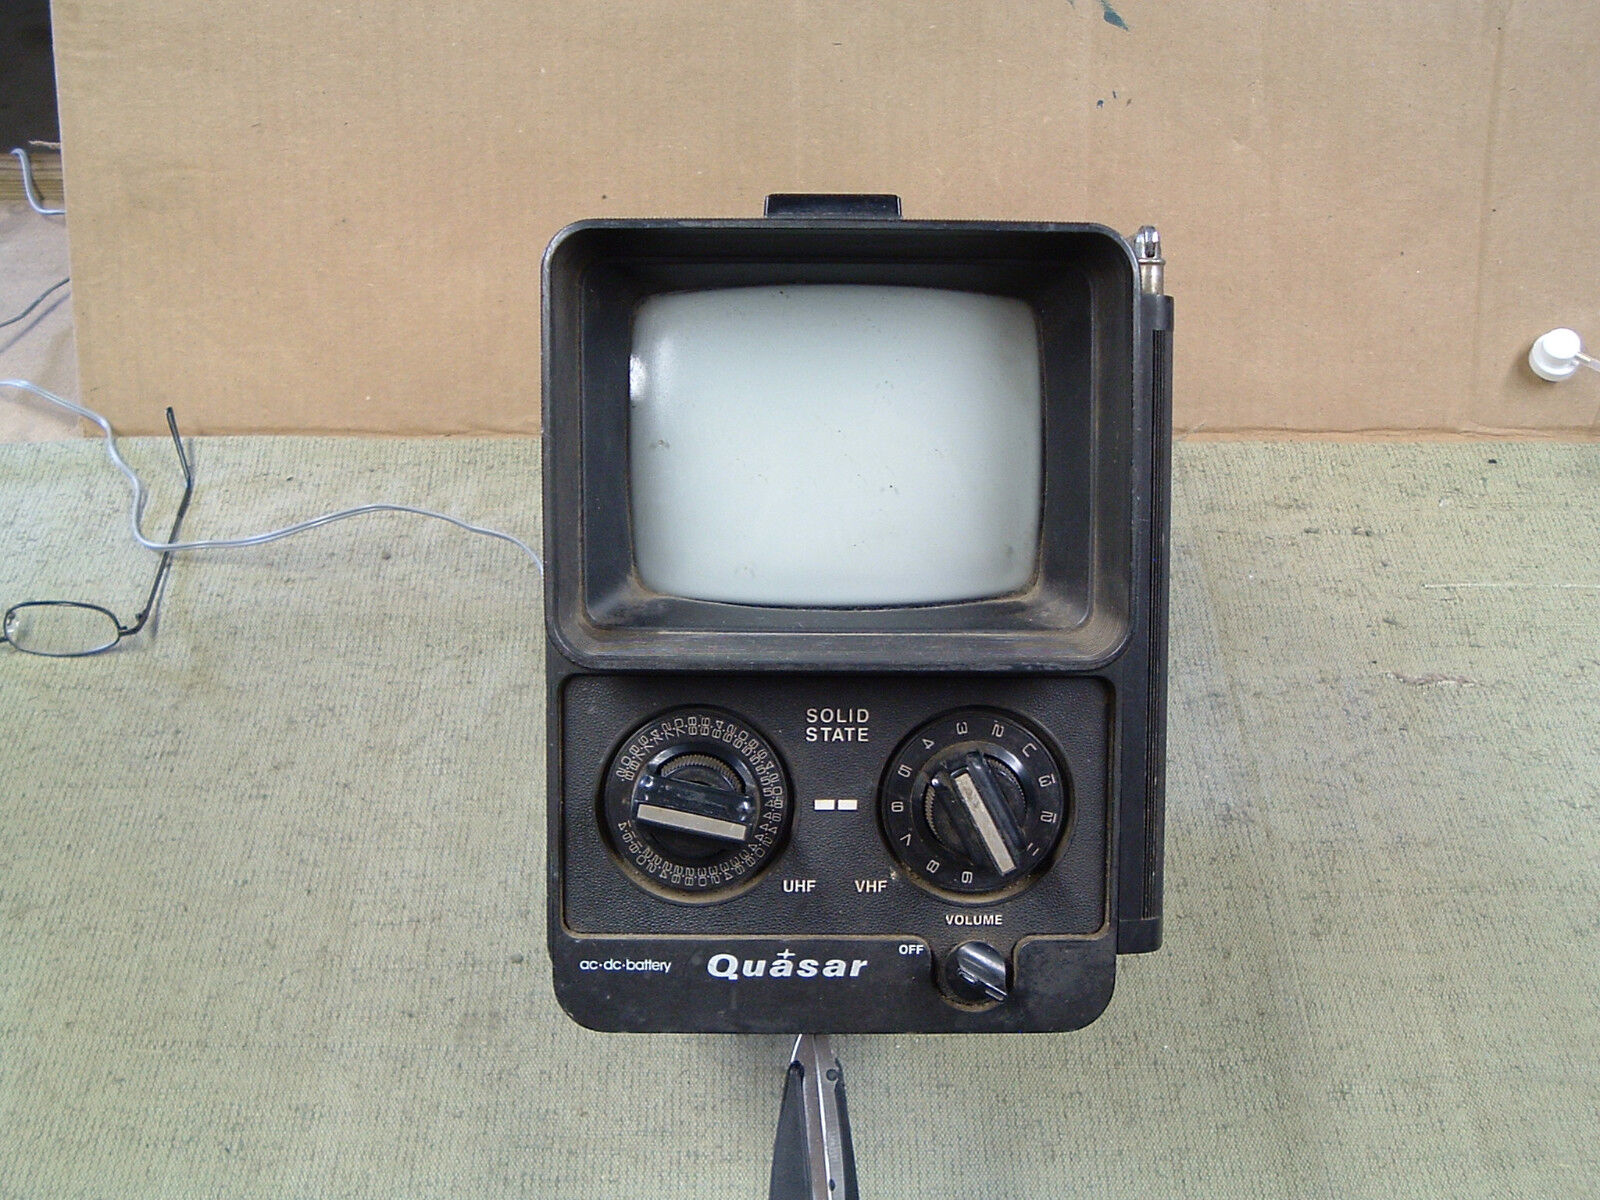 VINTAGE QUASAR SOLID STATE PORTABLE TV / DATED JULY 1978